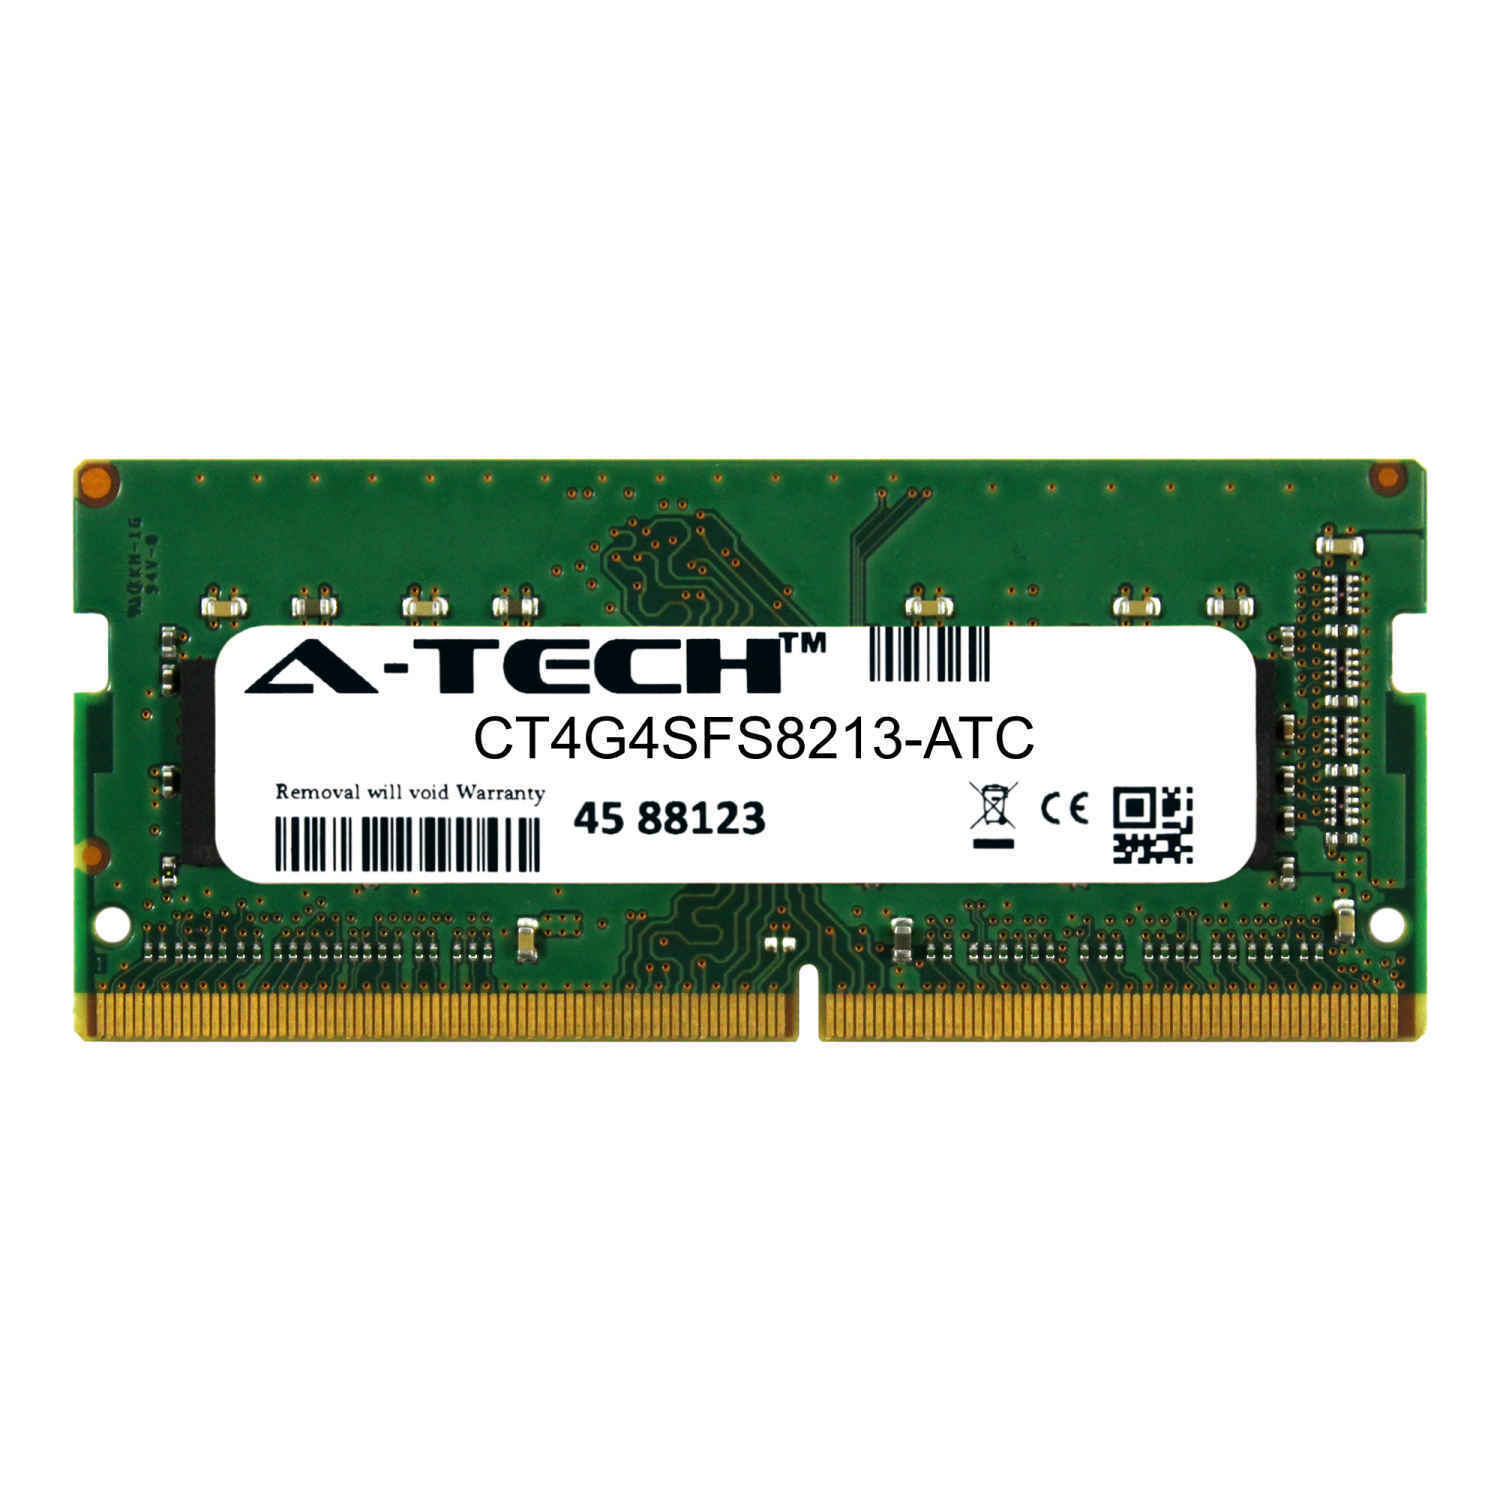 4GB DDR4 2133MHz PC4-17000 SODIMM (Crucial CT4G4SFS8213 Equivalent) Memory RAM